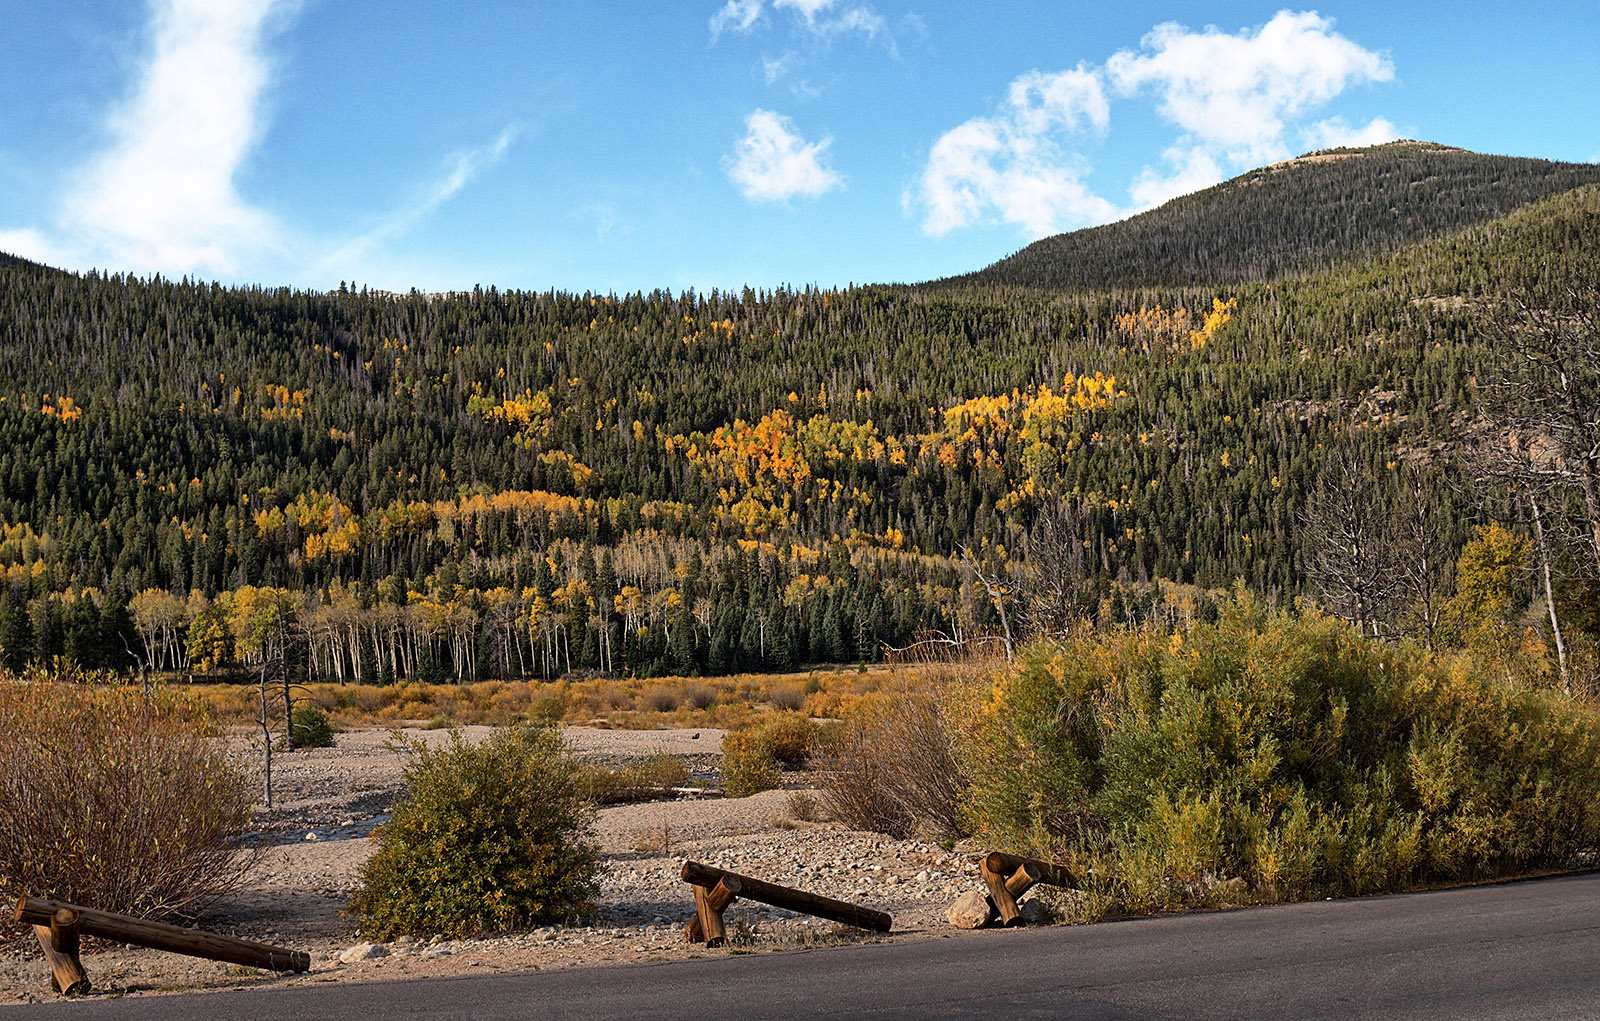 Aspen and Pines on Fall River Valley wall at the West Alluvial Fan.